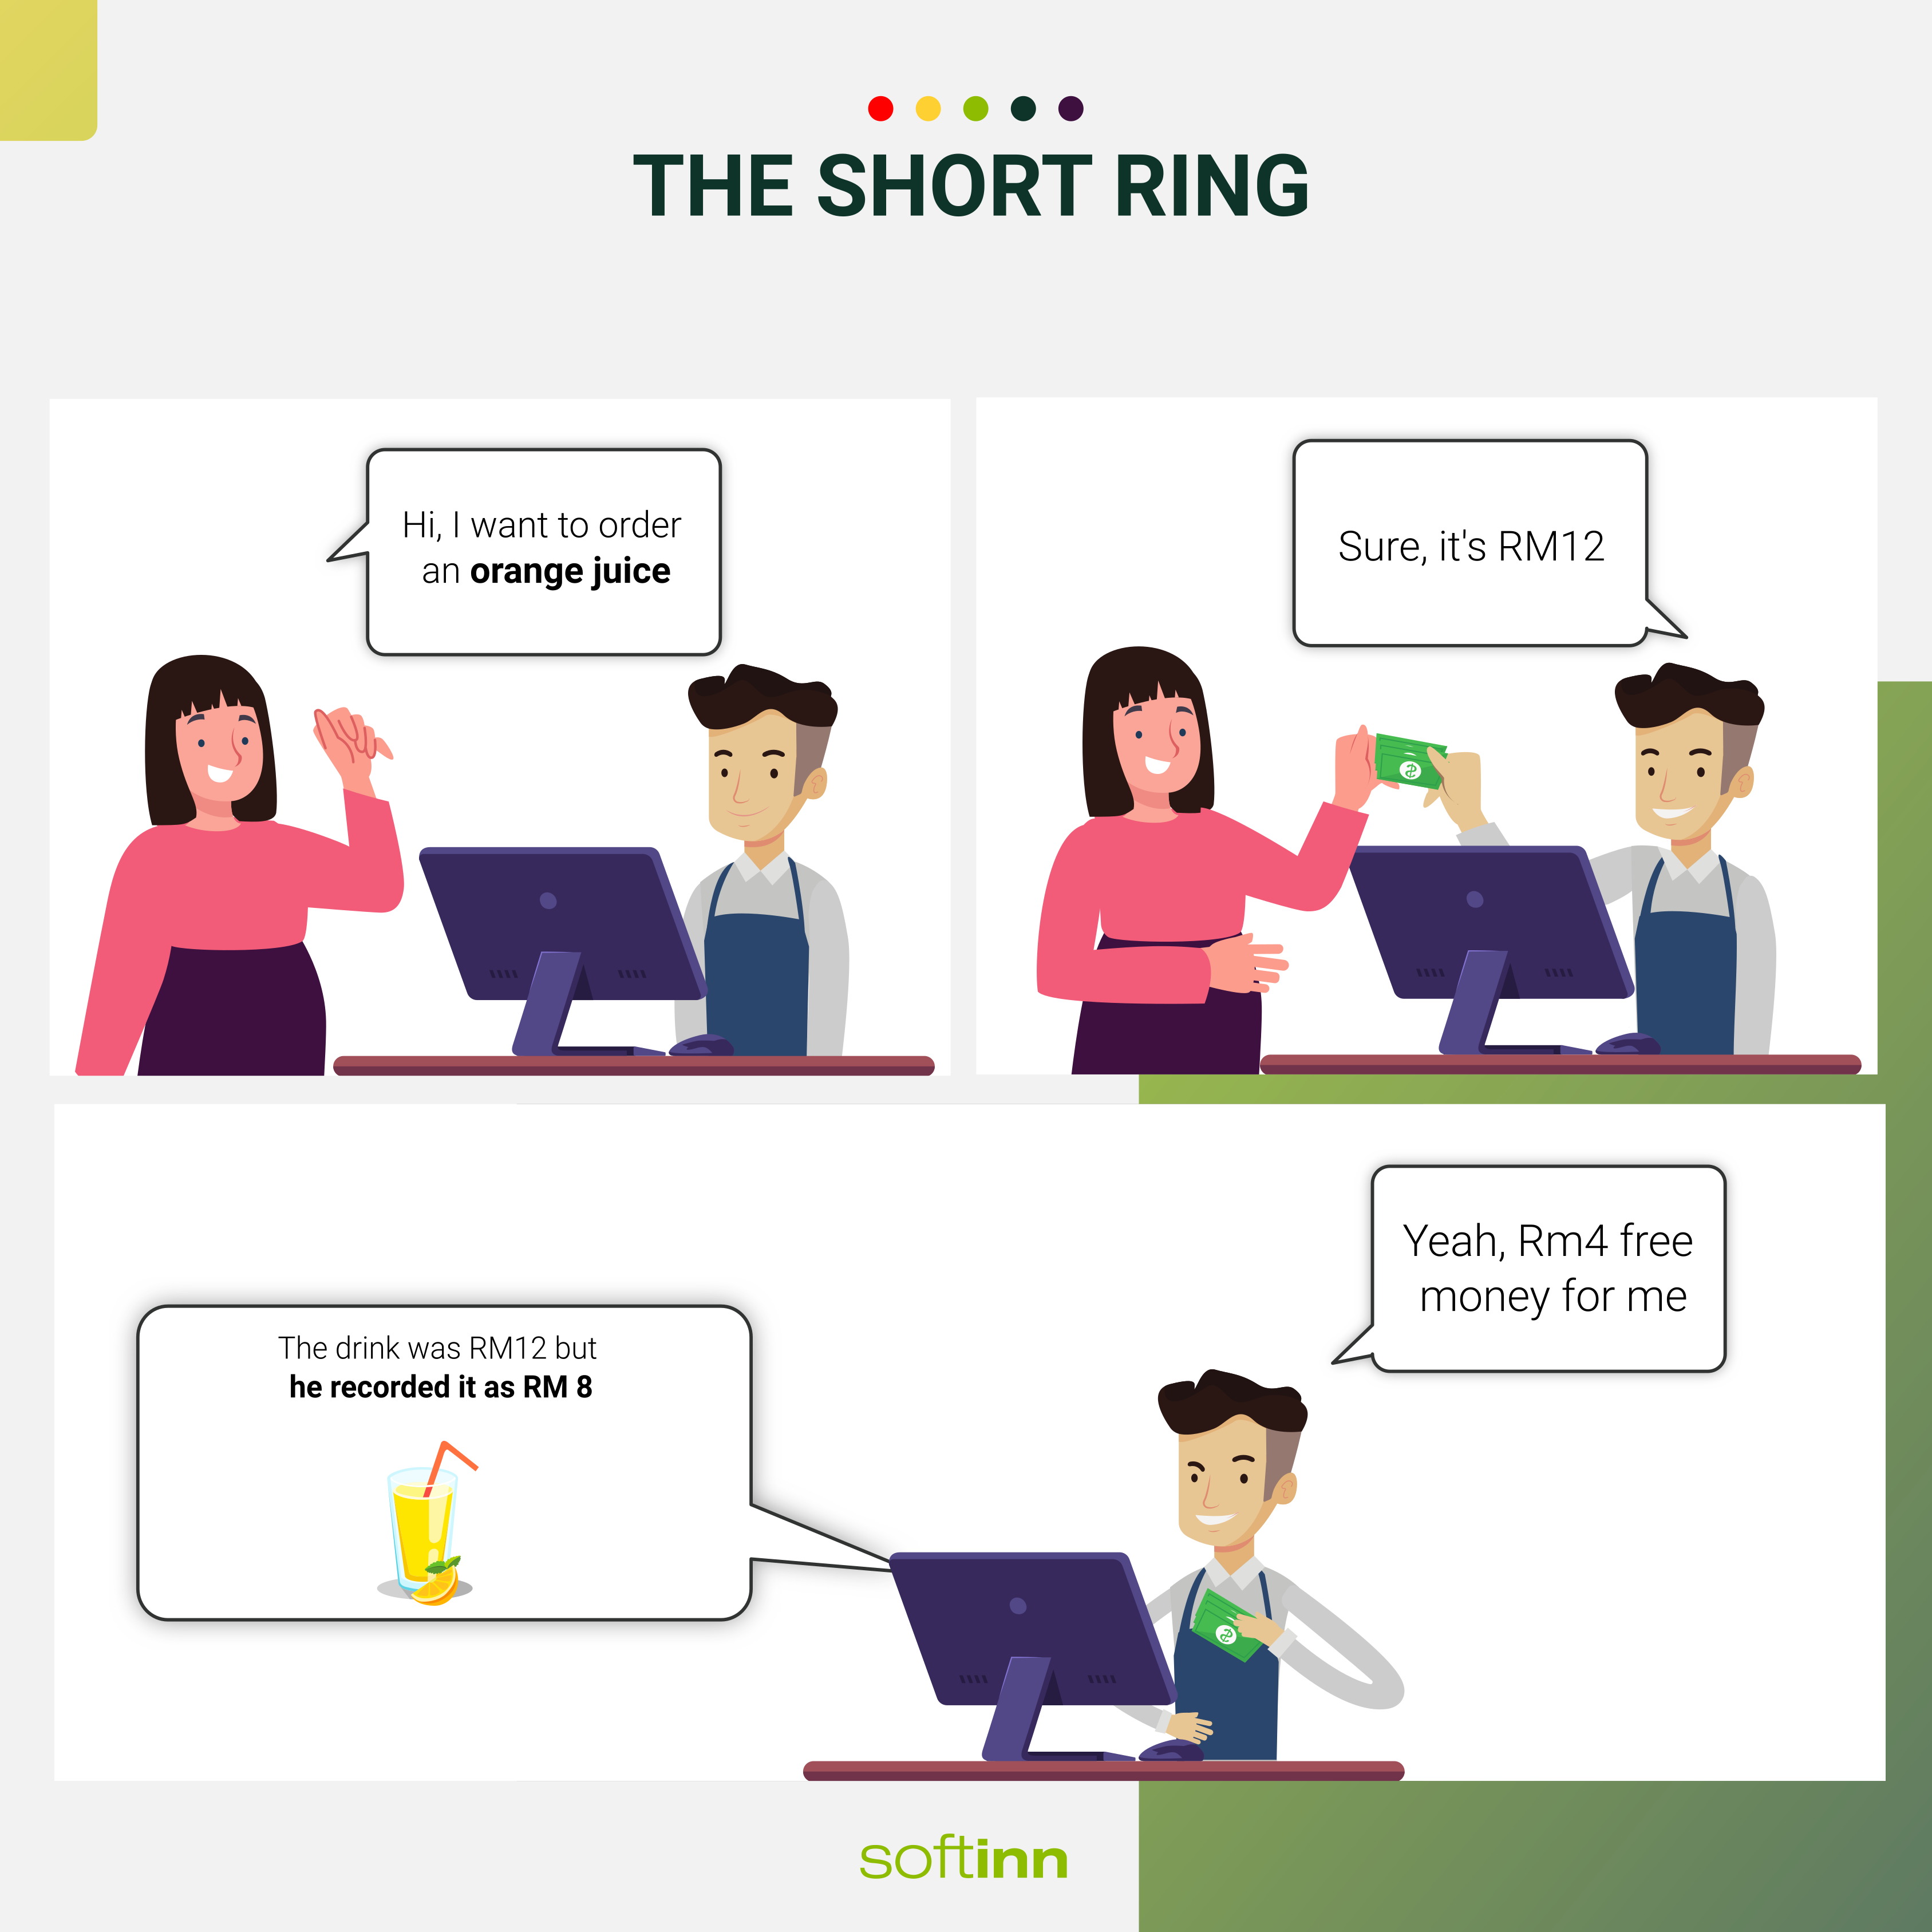 The short ring fraud at the hotel front desk